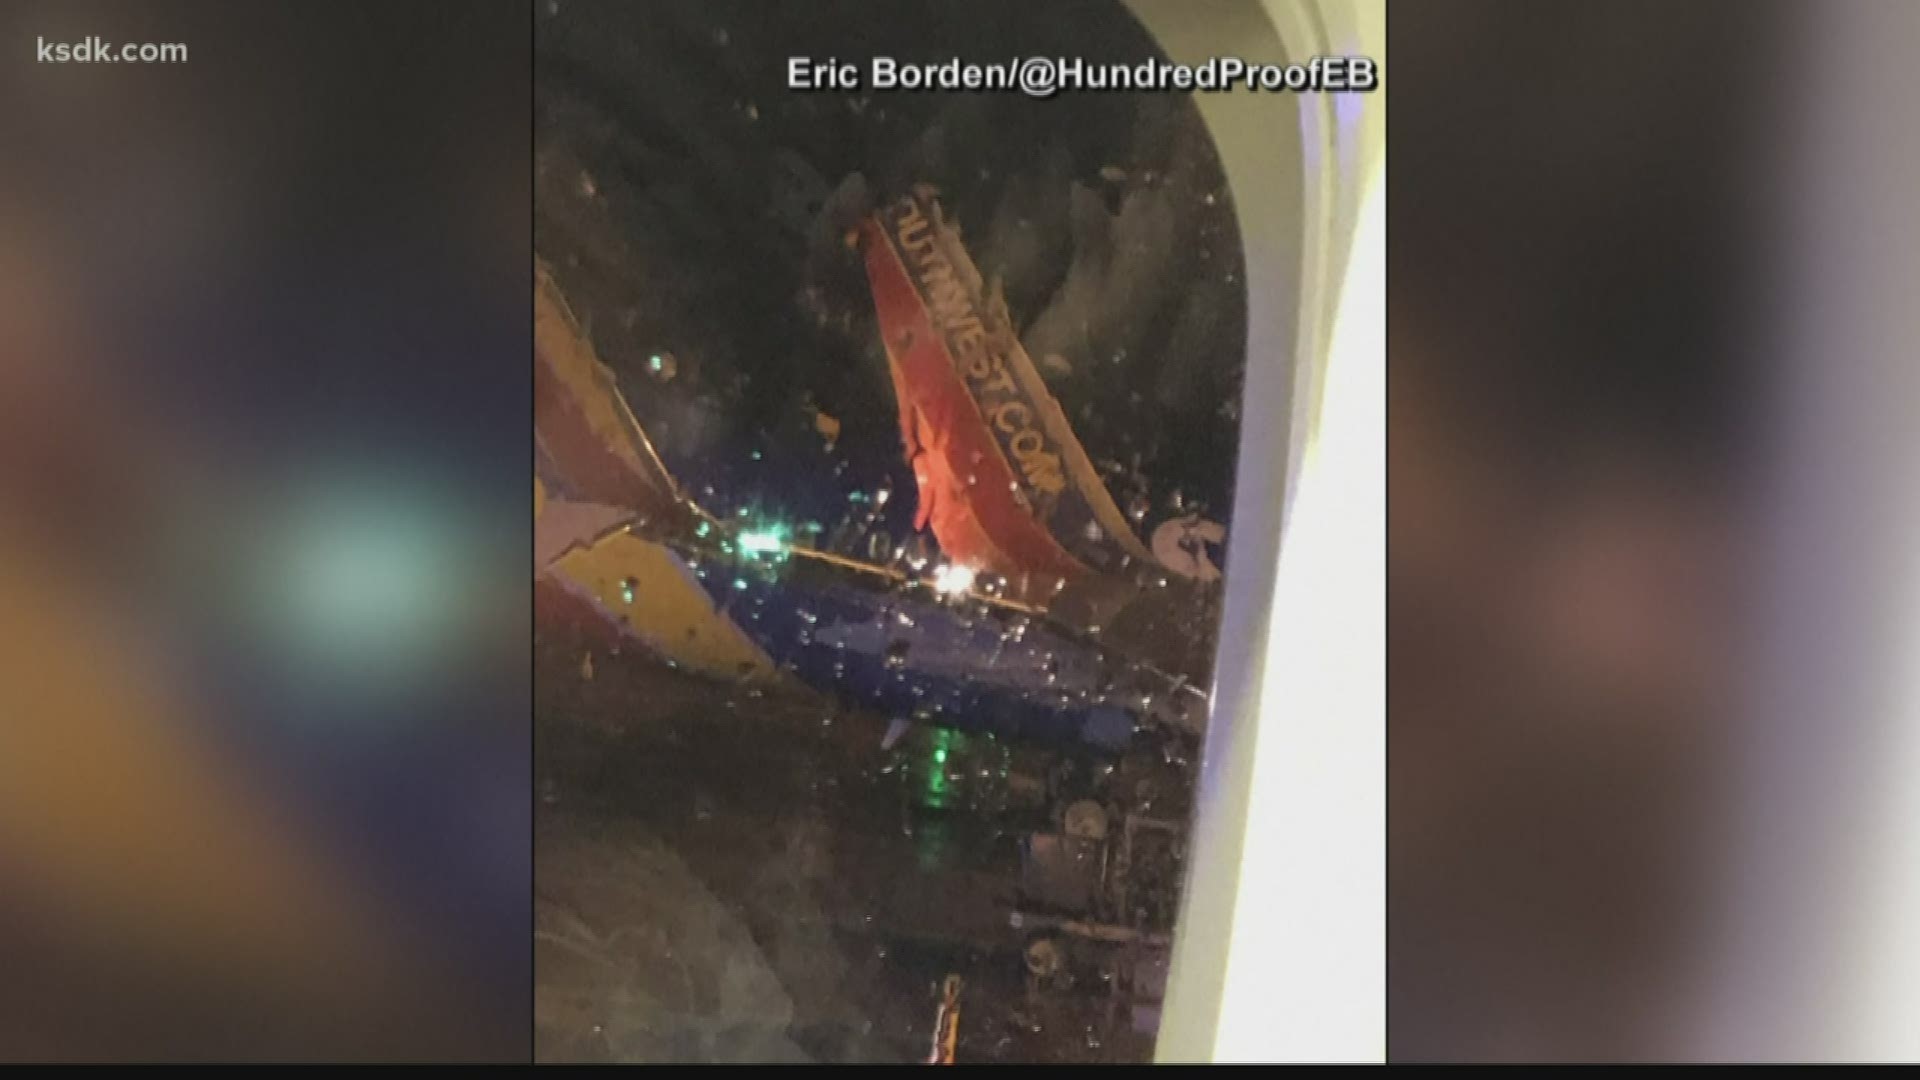 Two airplanes collided on the tarmac at the Nashville airport Saturday night. Southwest Airlines says no injuries were reported.